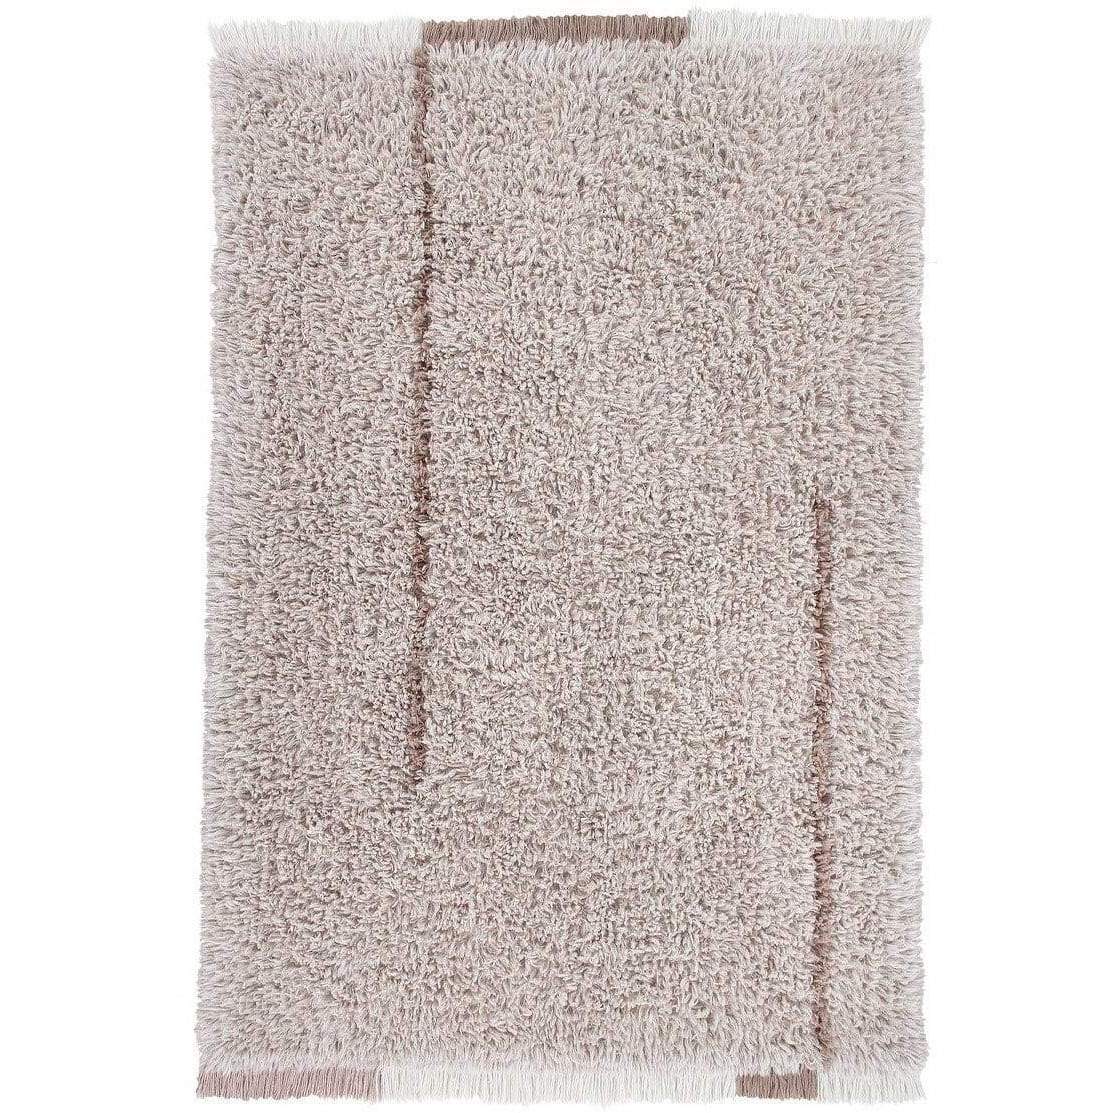 Lorena Canals Spring Spirit Wool Washable Area Rug